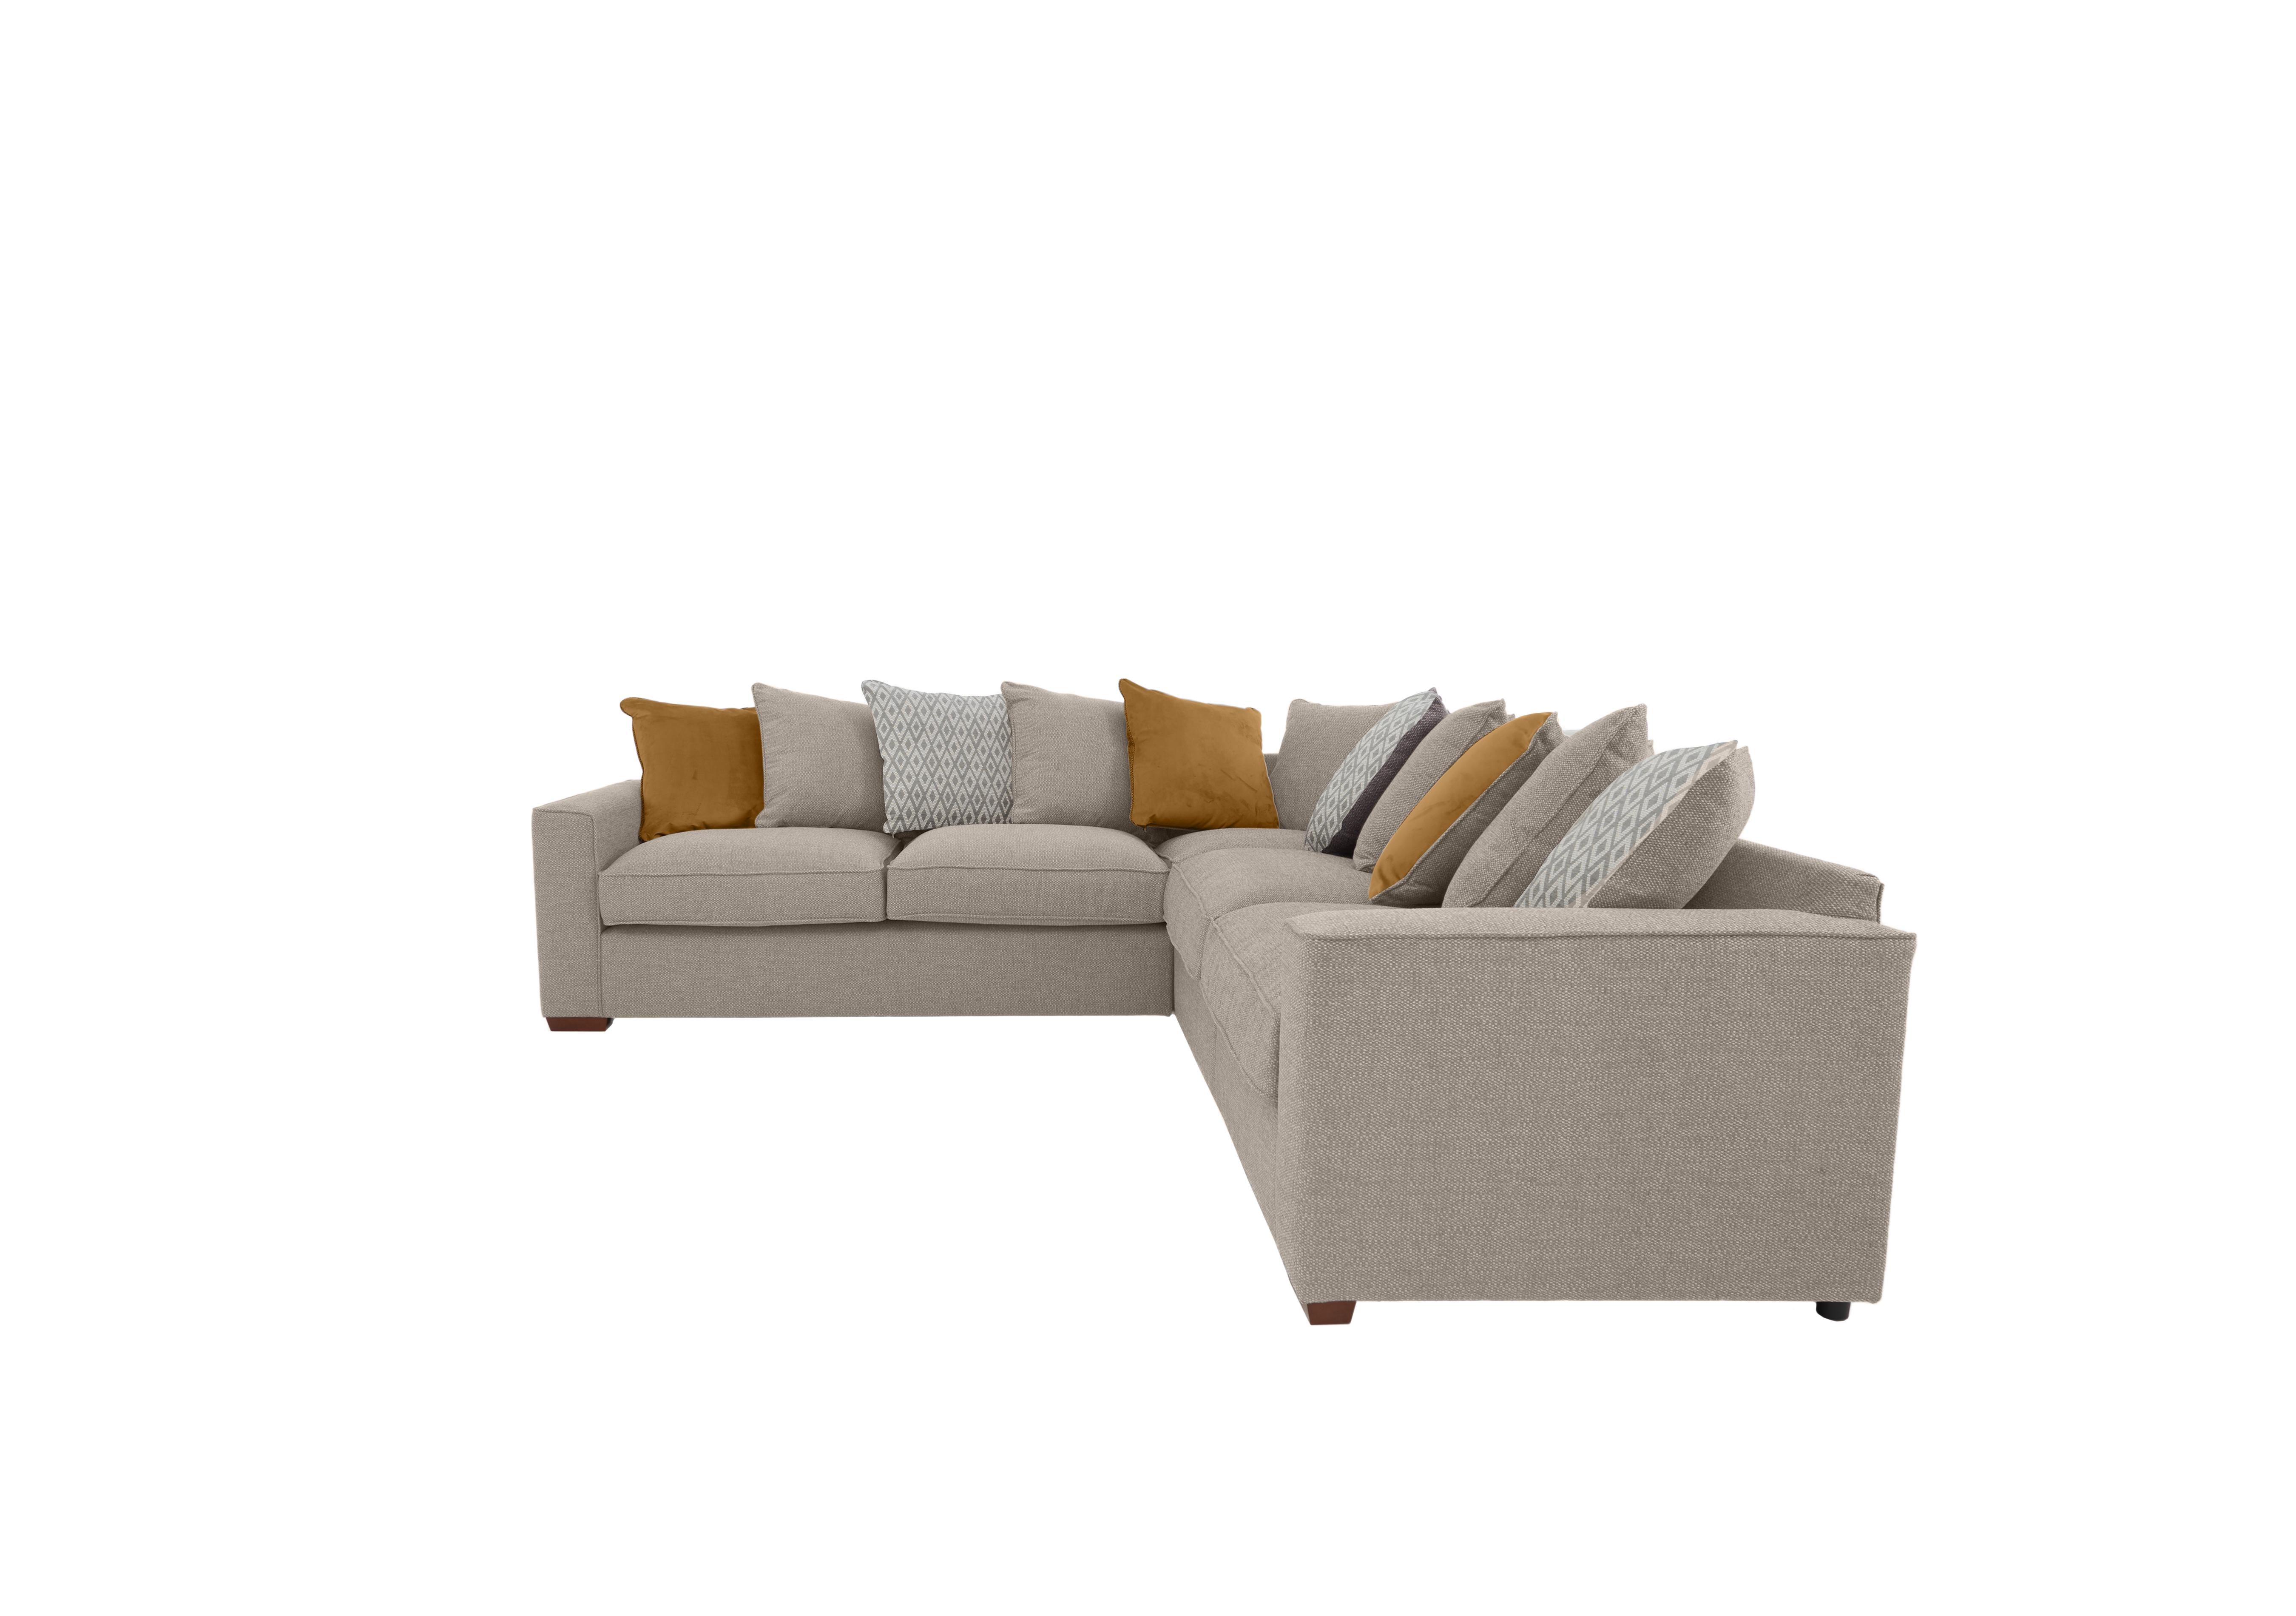 Cory Large Fabric Corner Scatter Back Sofa in Dallas Natural Mustard Pack on Furniture Village